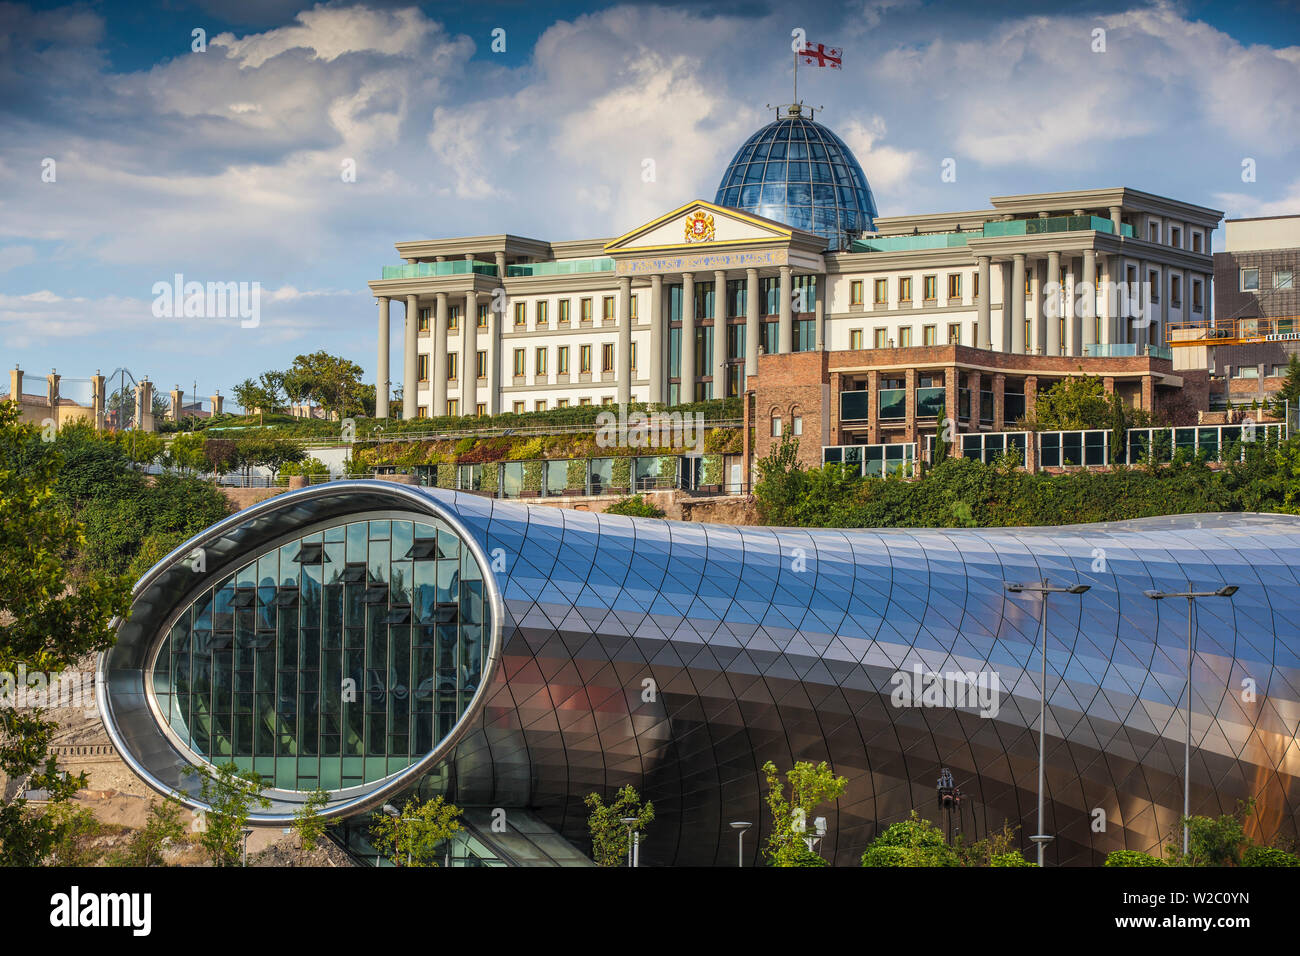 Georgia, Tbilisi, View of Mtkvari  (Kura) river, Rike Park Theater and Exhibition Hall, and  Presidential Palace Stock Photo